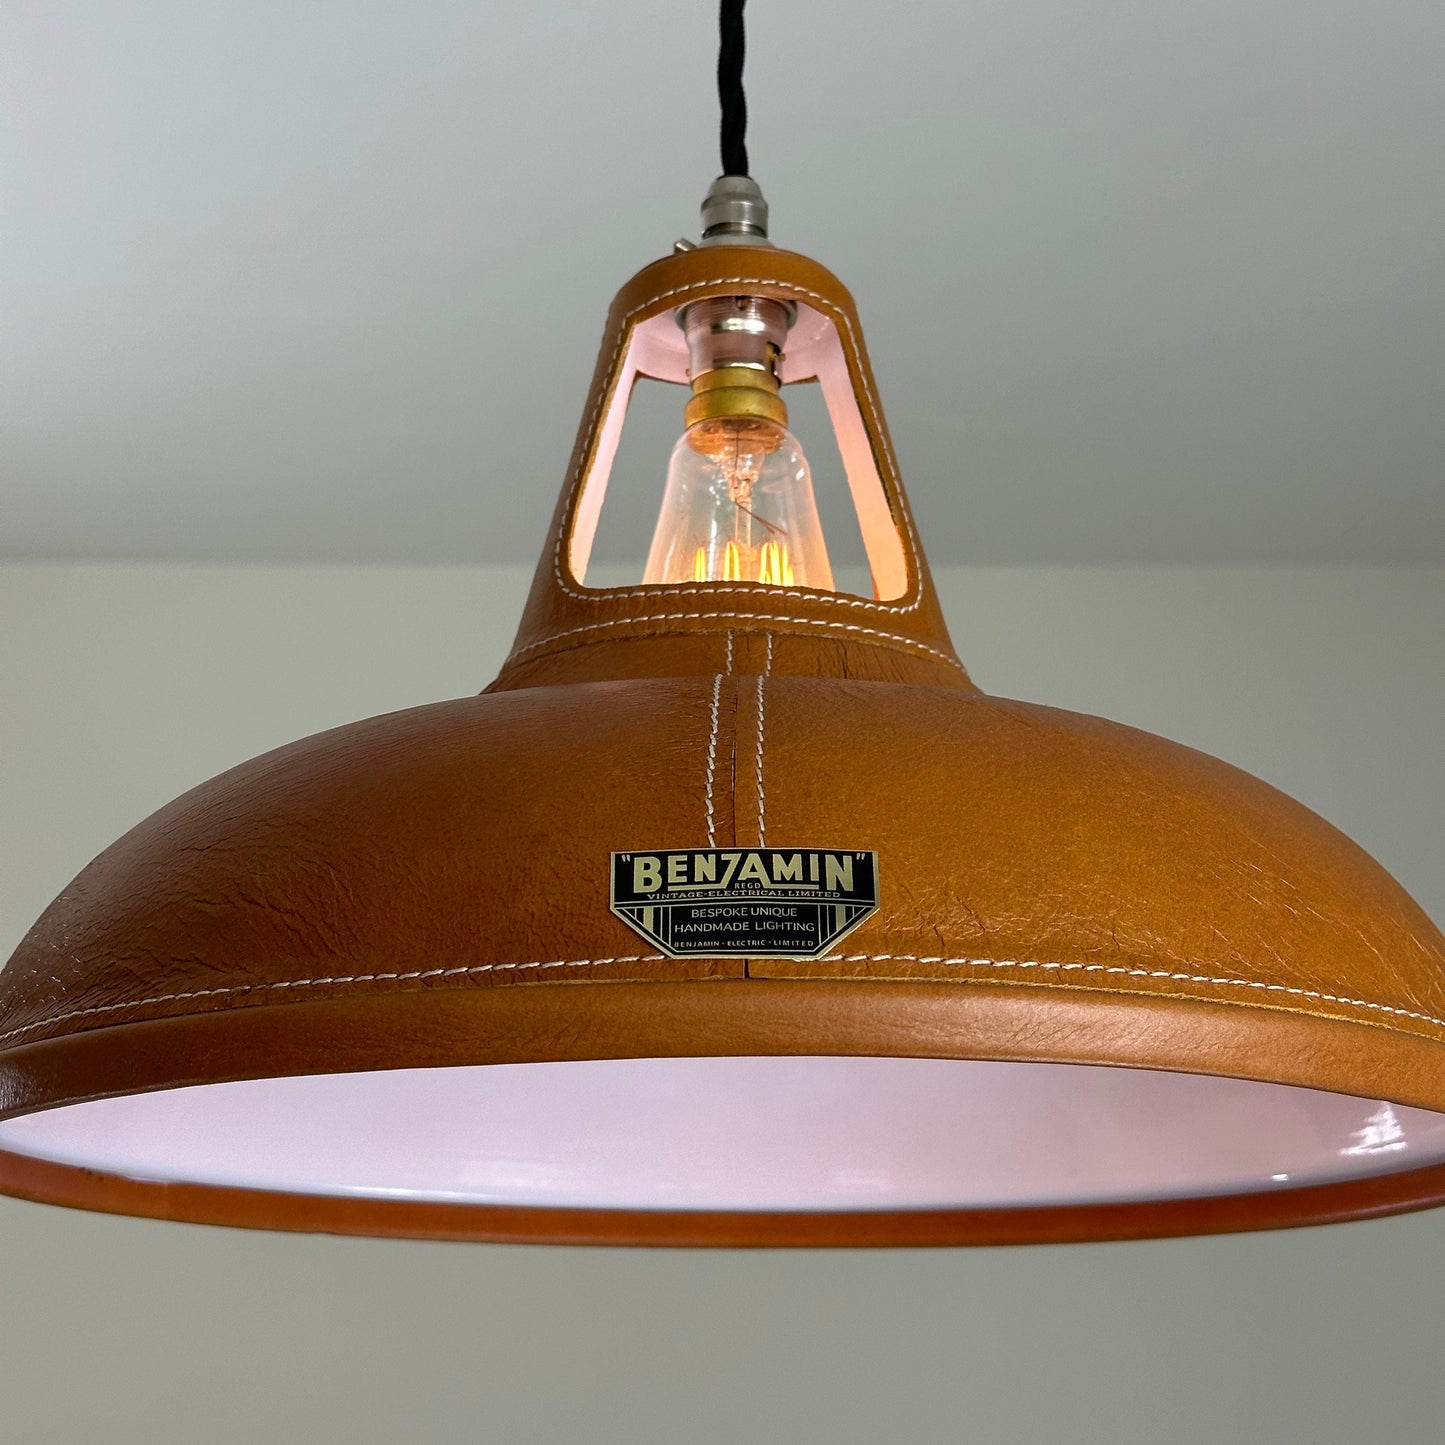 Cawston XL ~ Genuine Leather Solid Steel Lamp Shade 1932 Design Pendant Set Light | Ceiling Dining Room | Kitchen Table | Vintage | 14 Inch